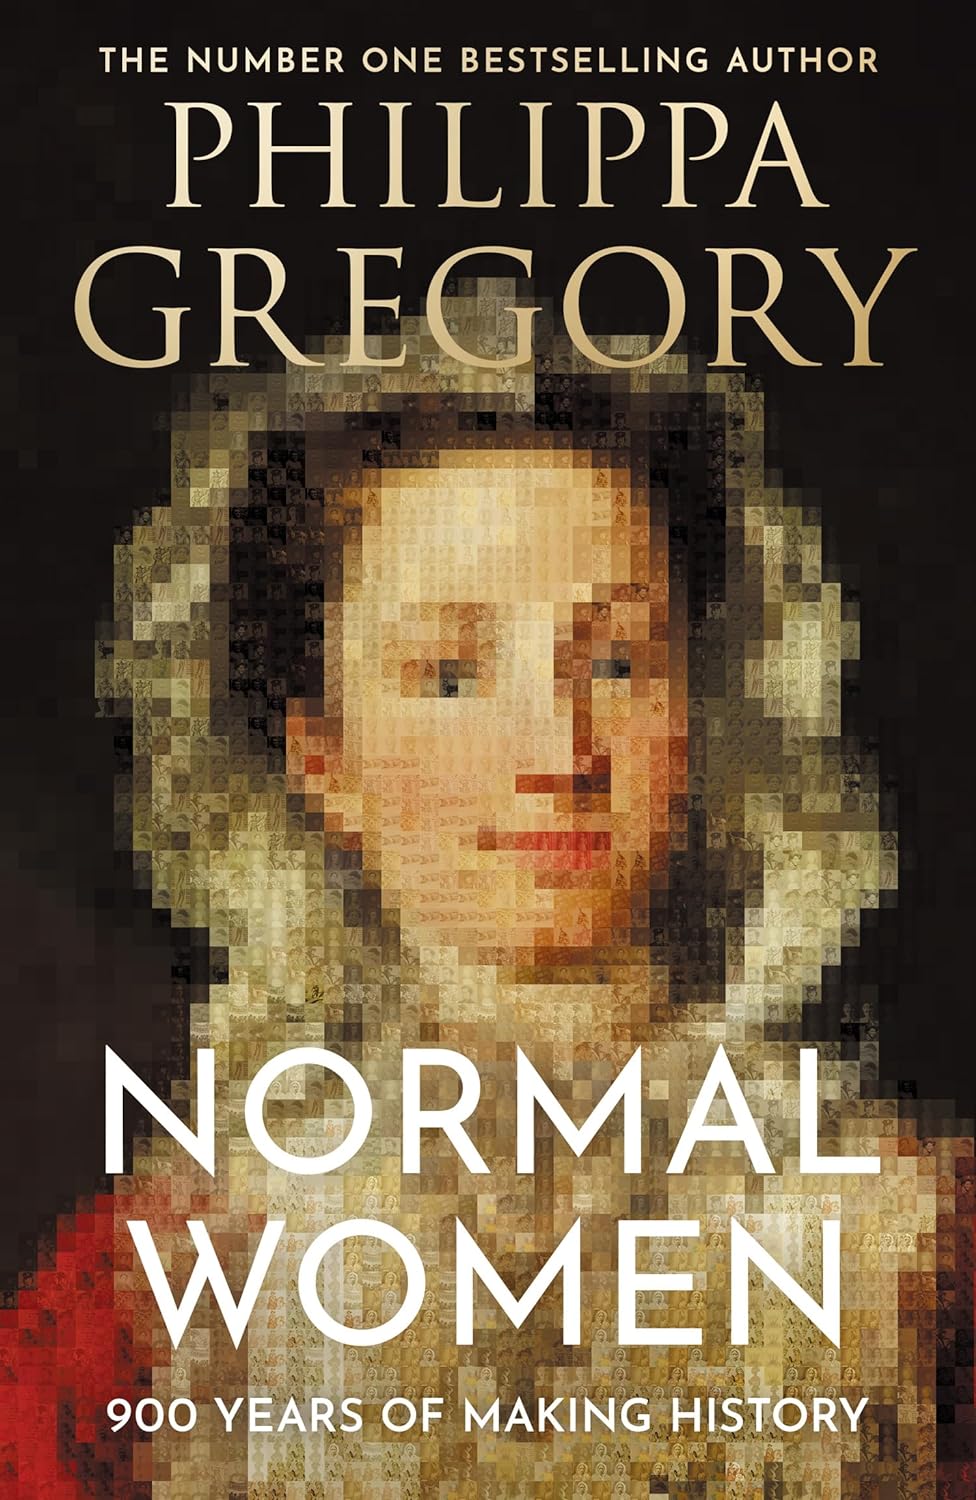 Cover of "Normal Women" by Philippa Gregory